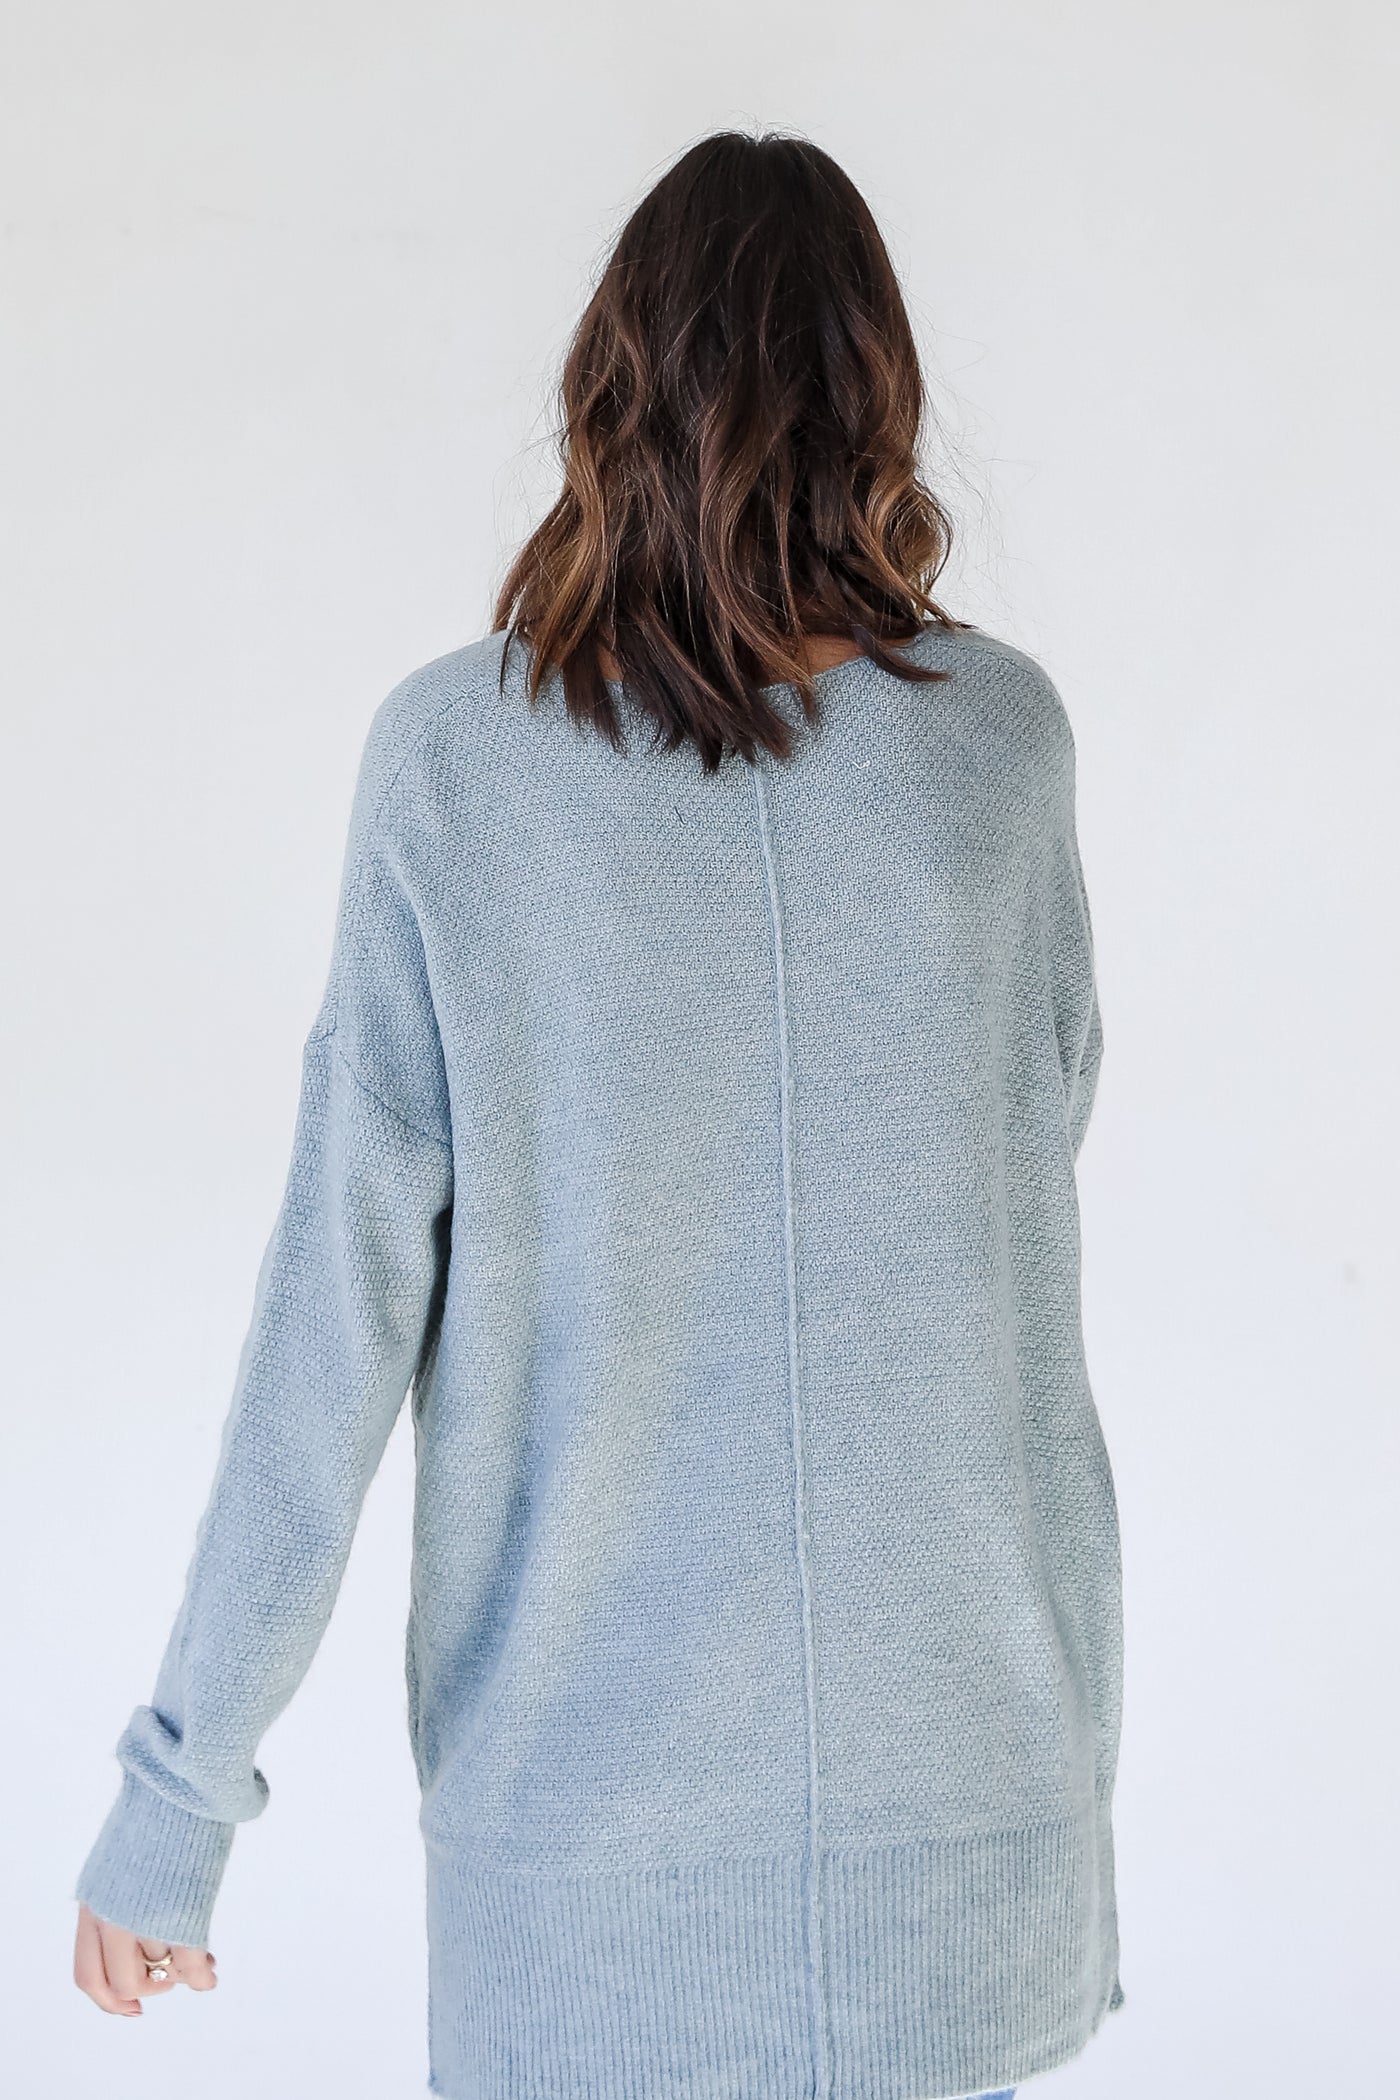 Oversized Sweater in light blue back view